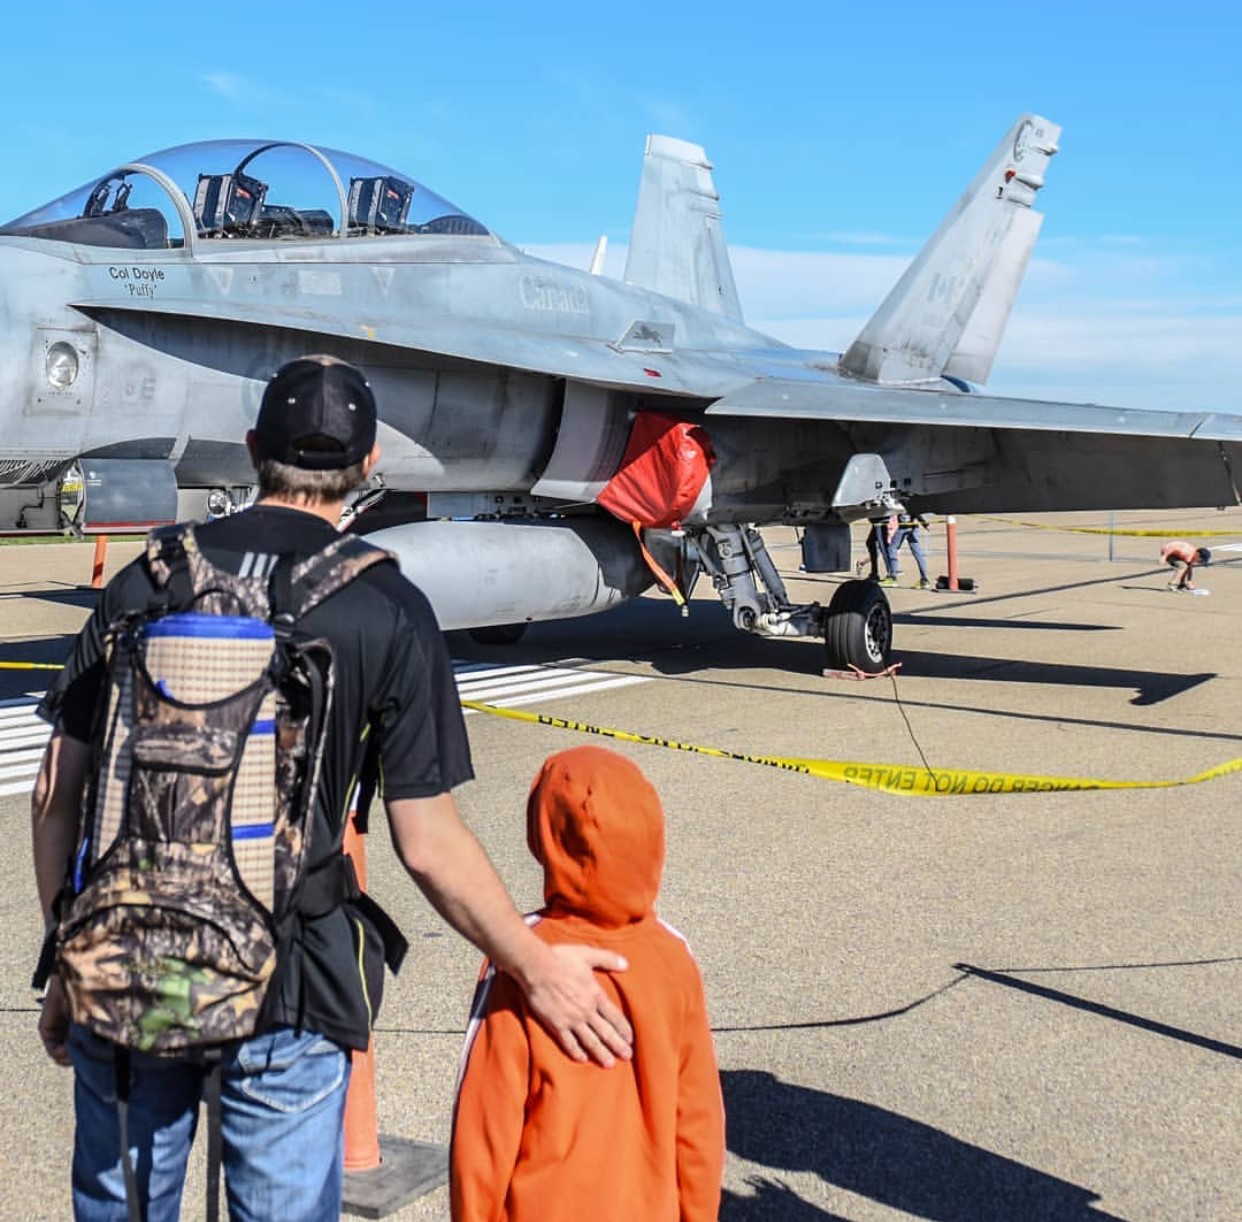 The Edmonton Airshow is Fun for the Whole Family Get the Details